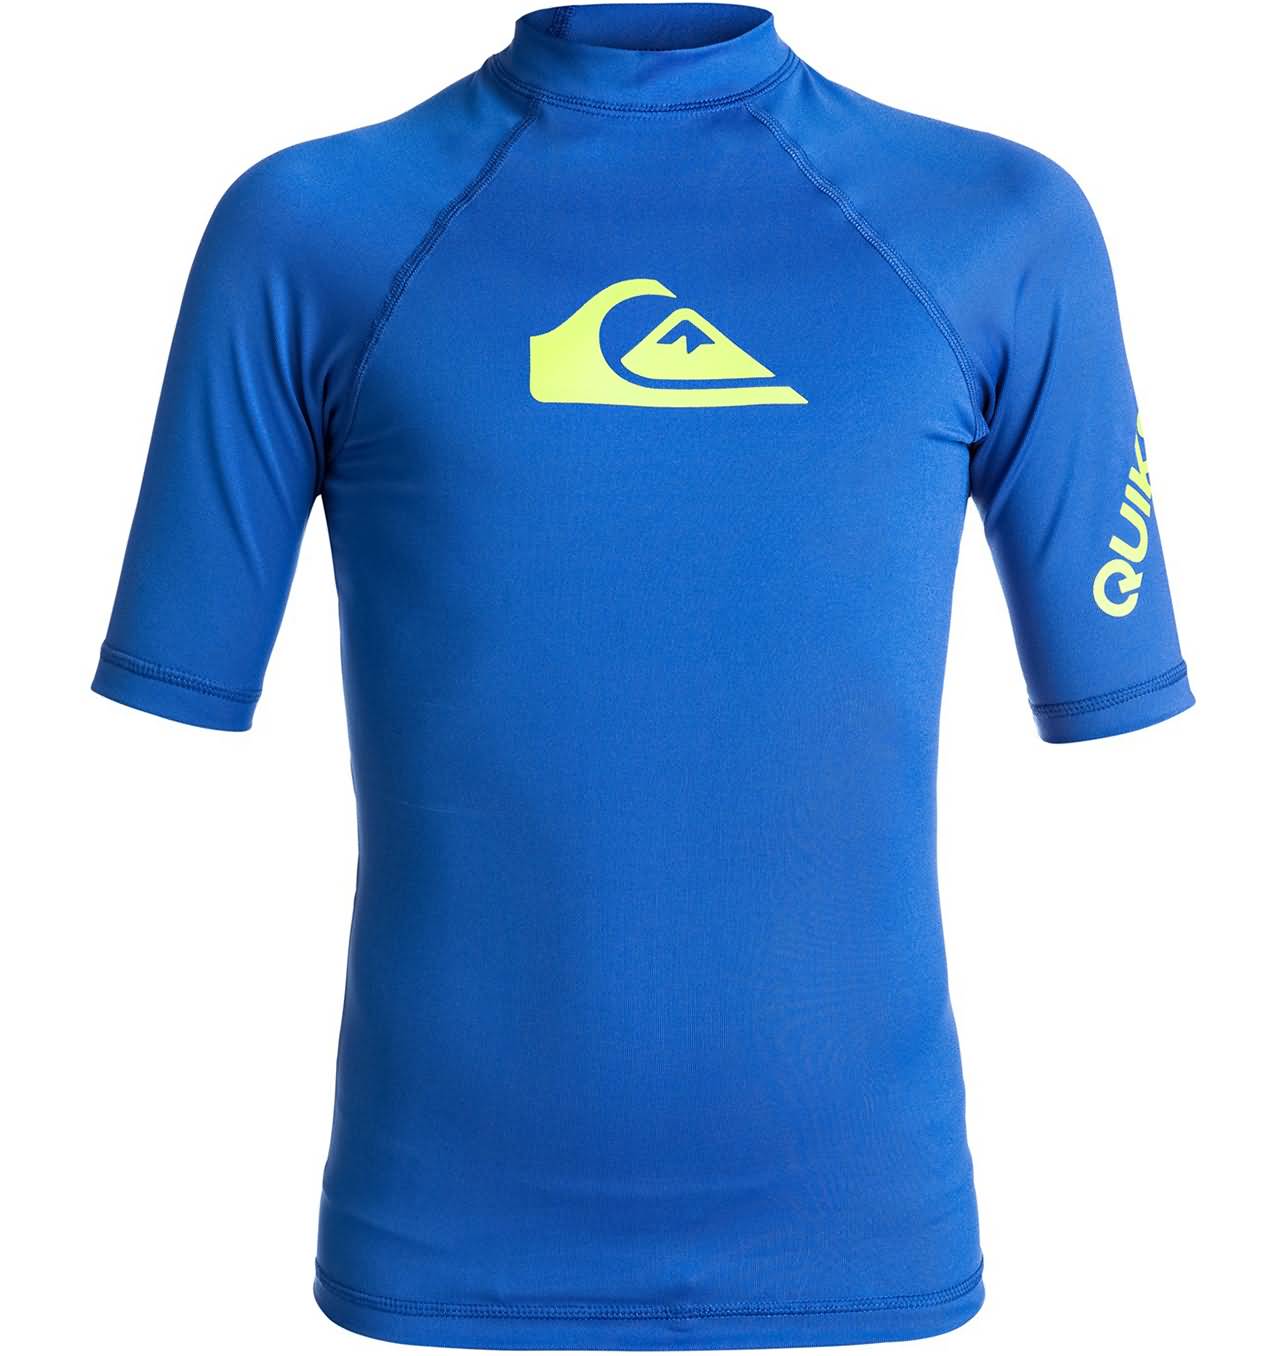 Quiksilver Surf Fall 2017 Youth Boys Beach Surfing Rashguards Preview